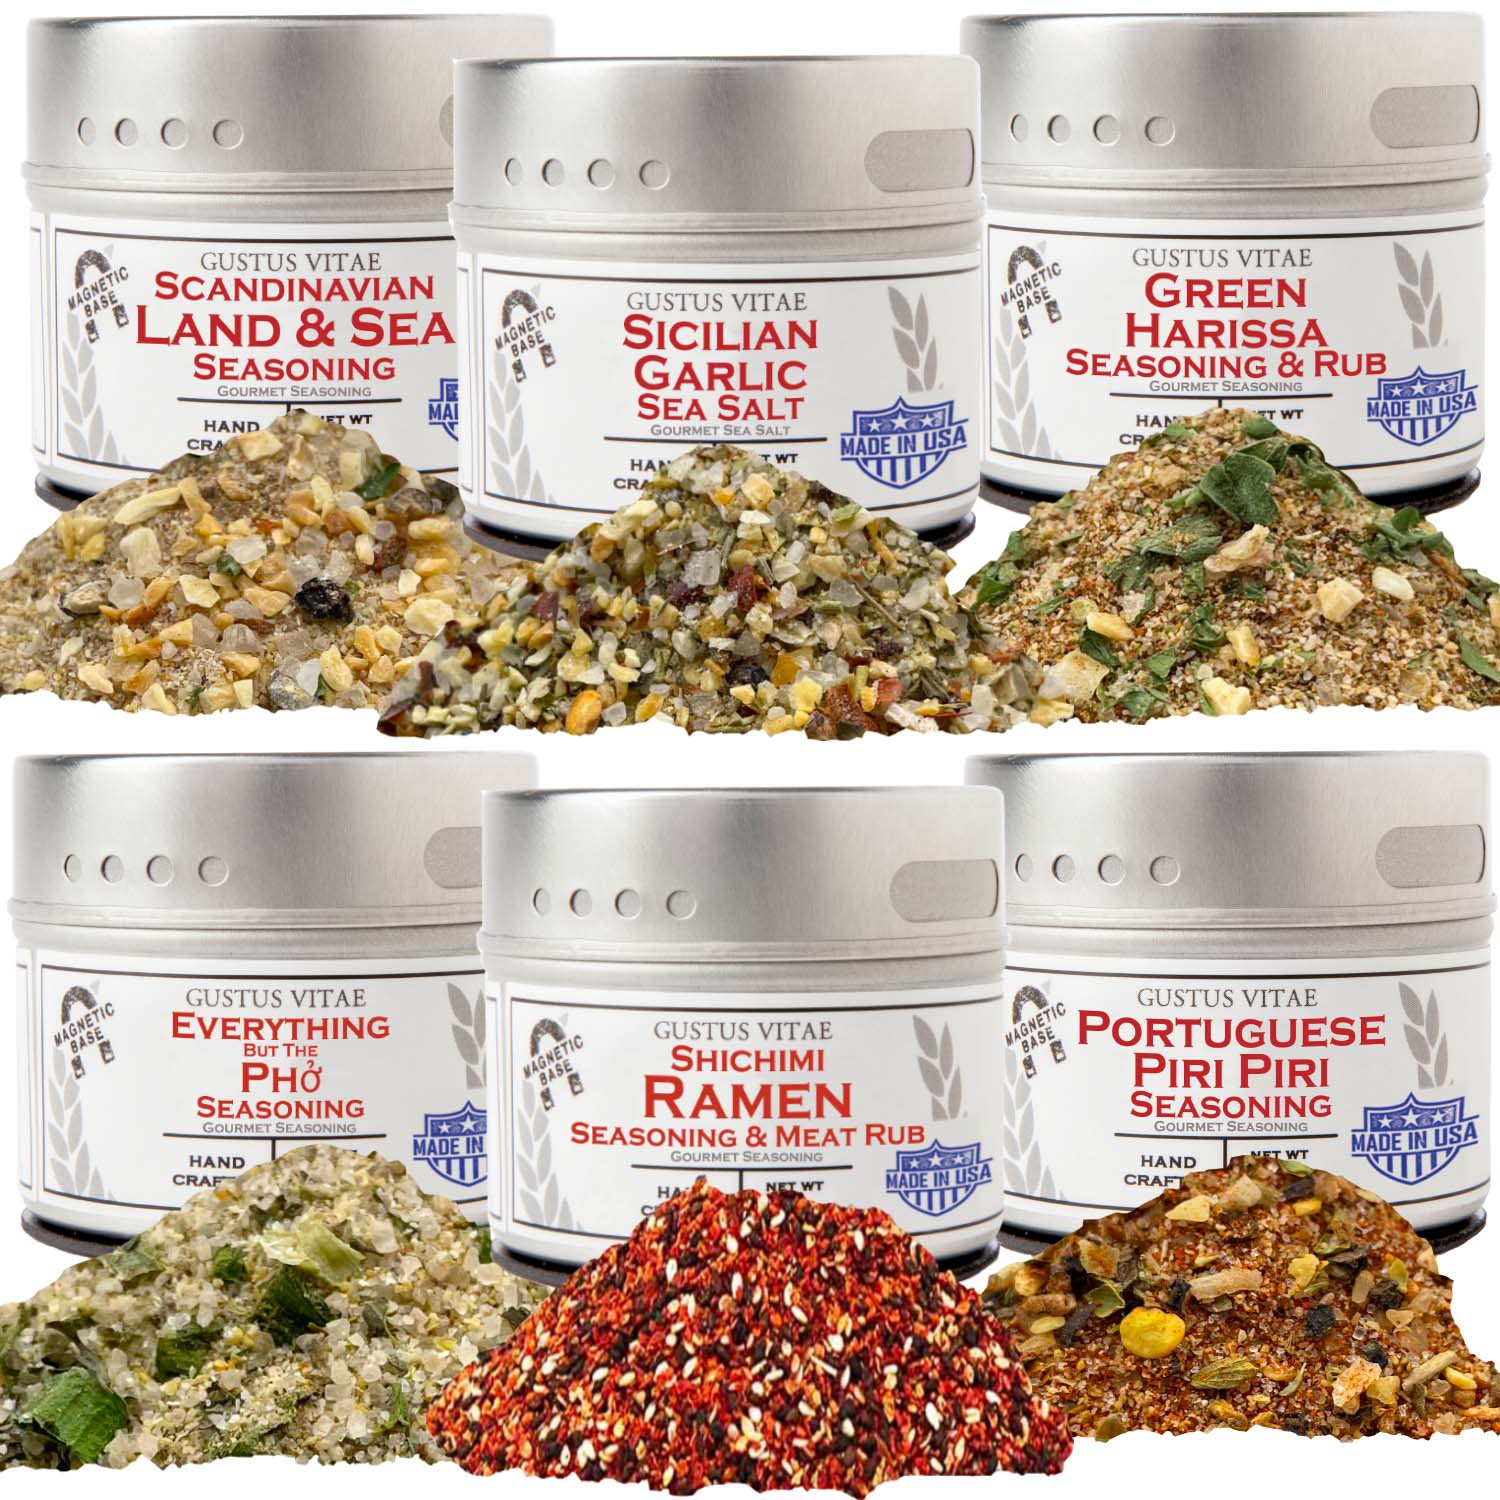 https://www.gustusvitae.com/cdn/shop/products/global-foodie-favorites-world-spanning-6-pack-collection-authentic-gourmet-seasonings-and-spice-blends-collections-gift-sets-gustus-vitae-489666_1500x.jpg?v=1644177514